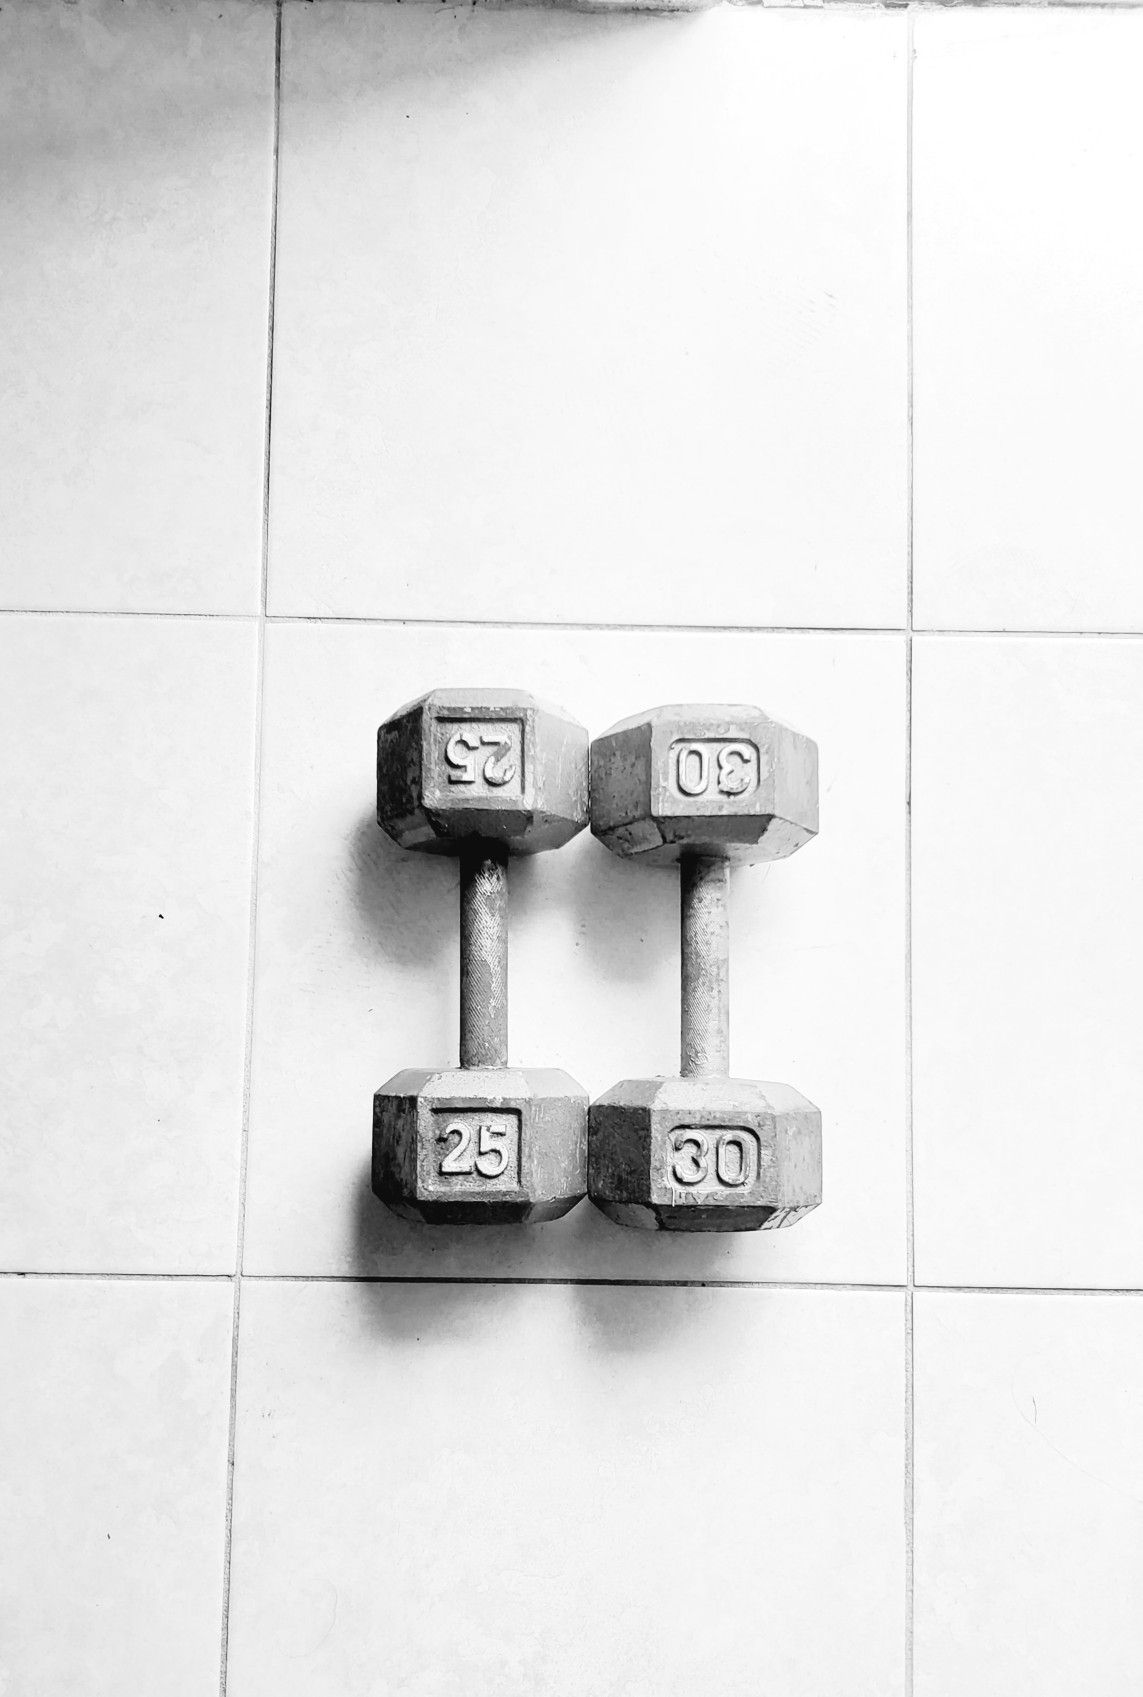 HEX DUMBBELLS $1 DOLLAR FOR A POUND